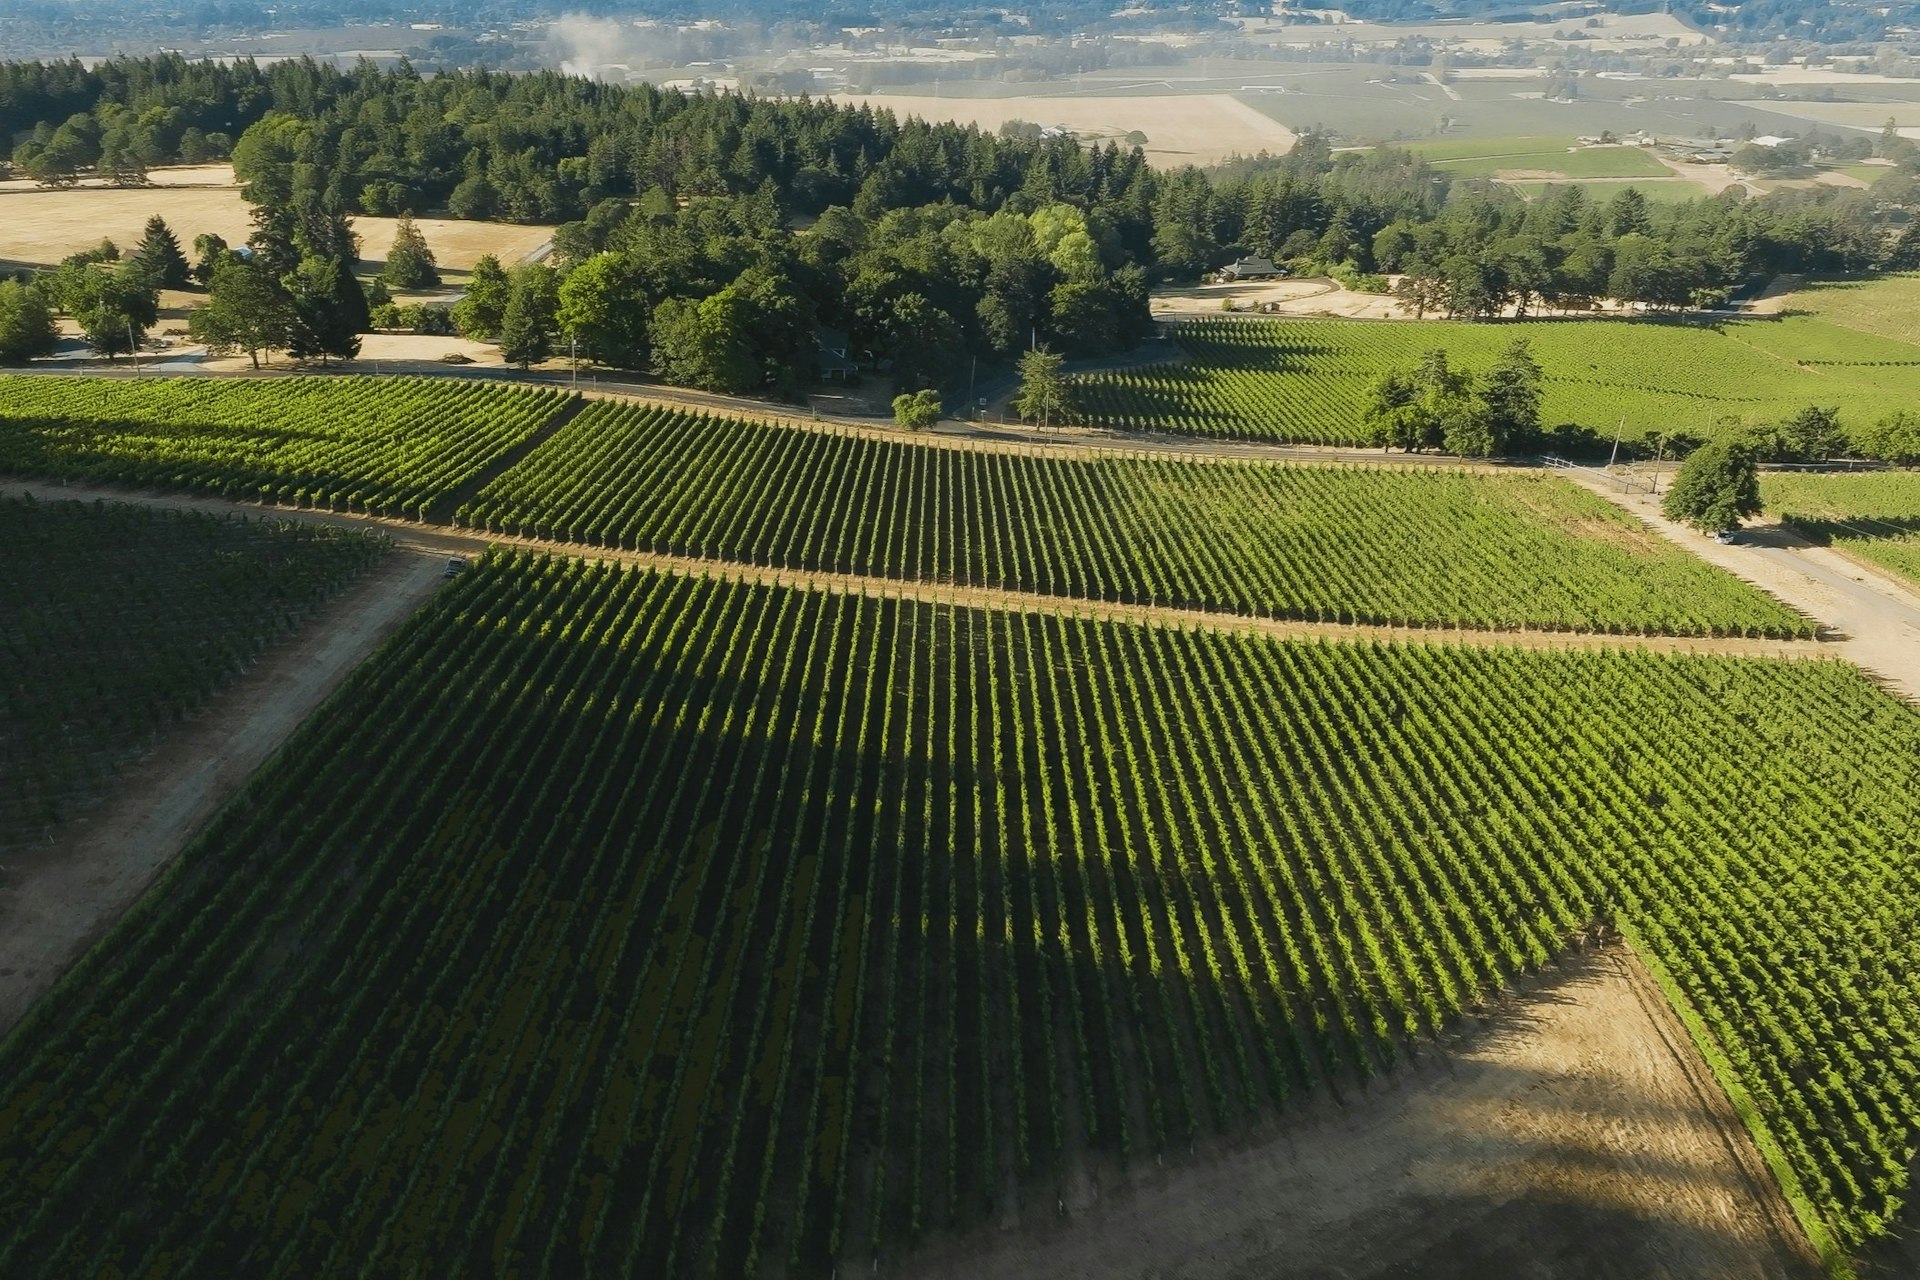 An aerial view of grape vines at Adelsheim Vineyard, Dundee, Willamette Valley, Oregon, USA